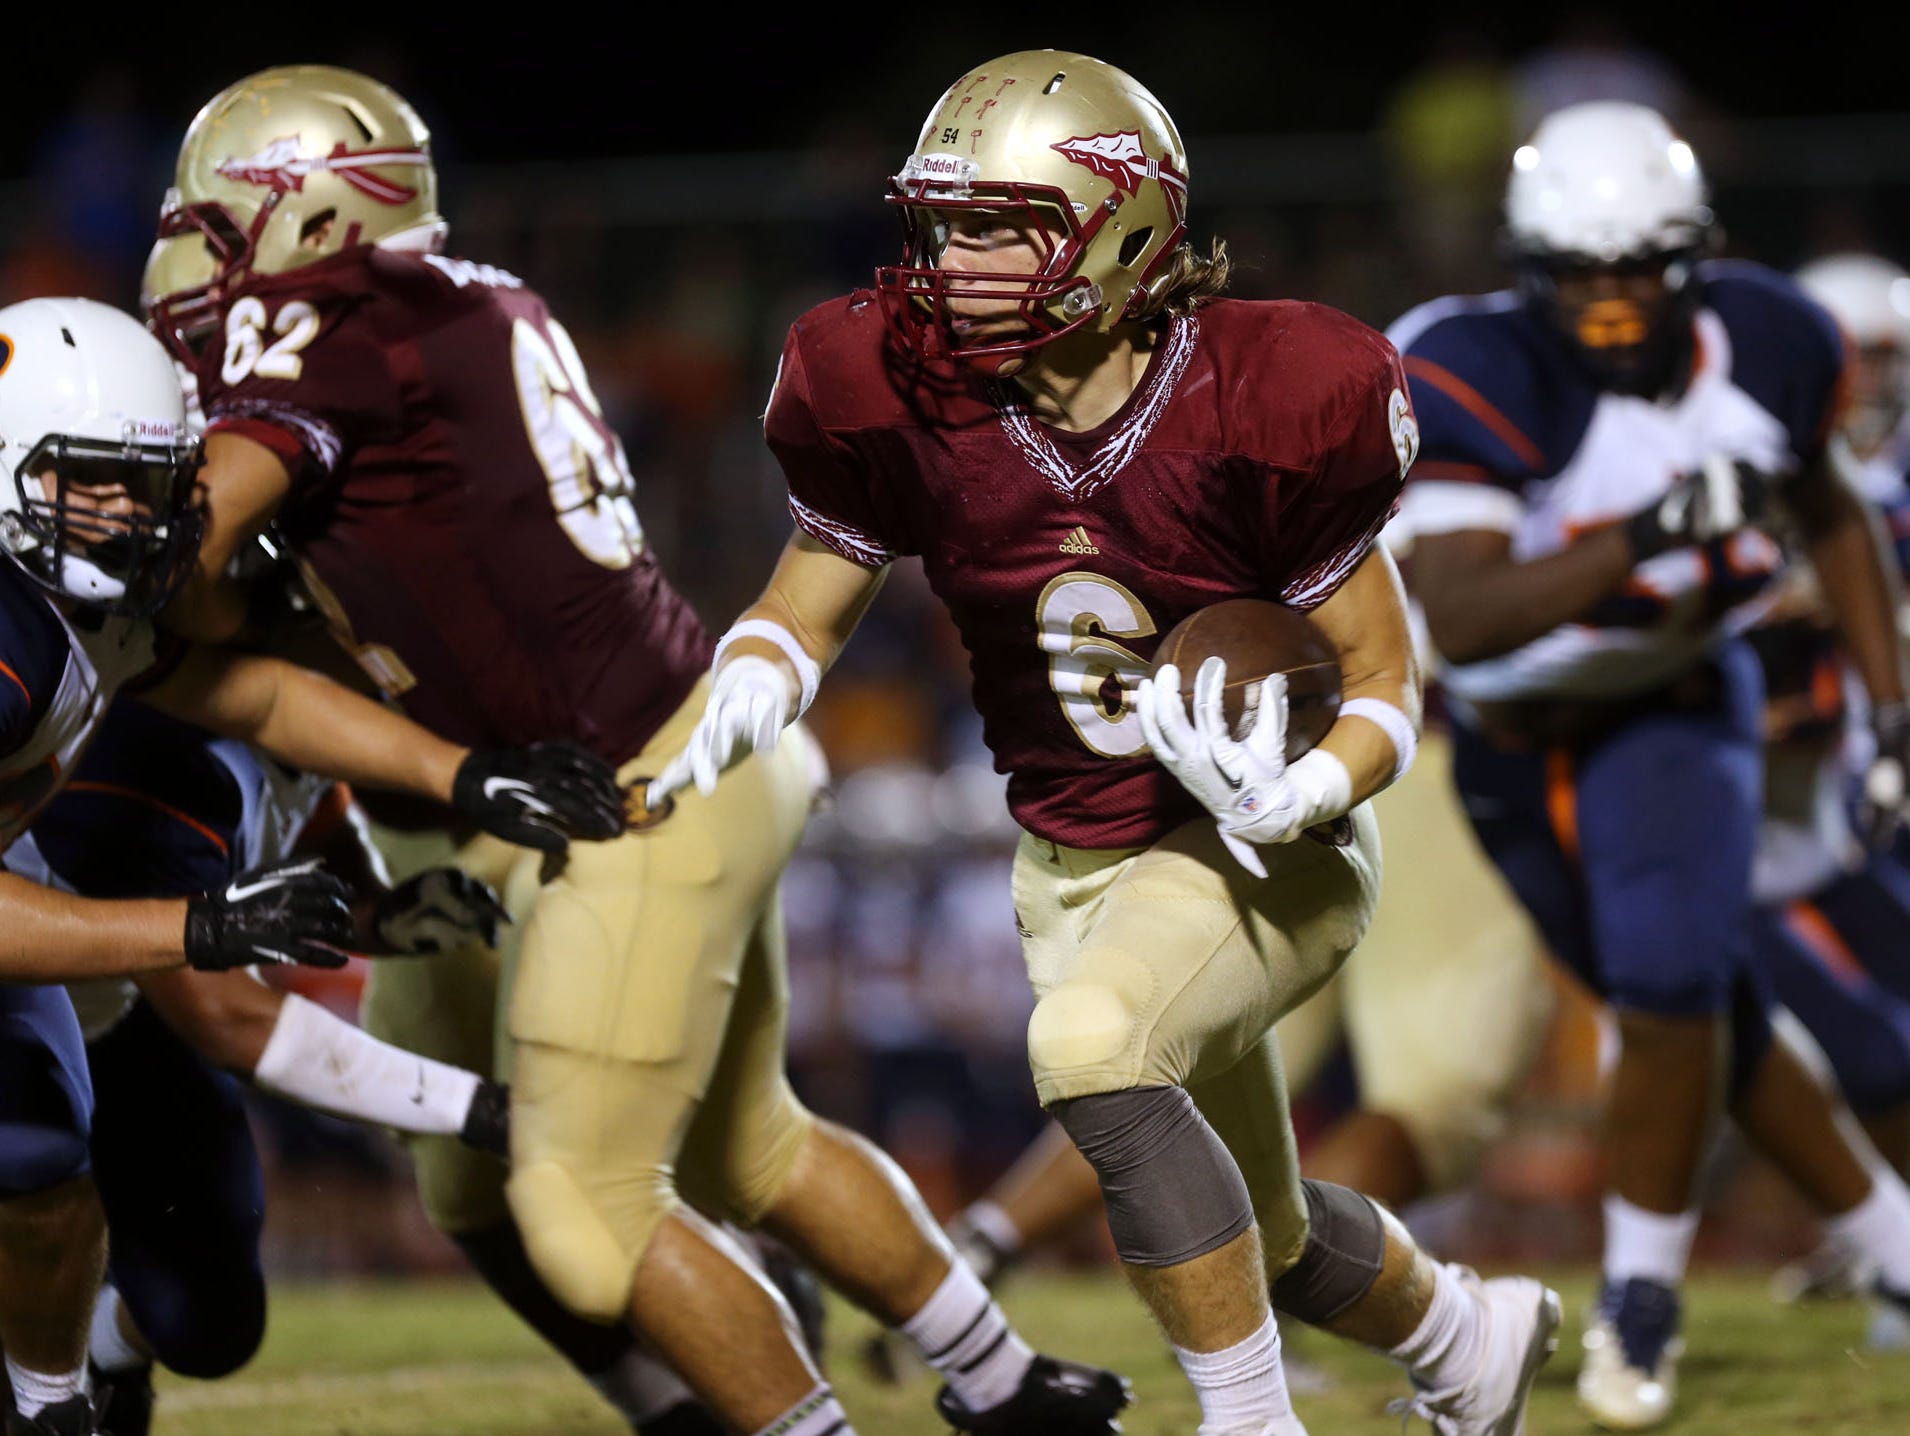 Riverdale's Austin Bryant rushes against Blackman on Sept. 5, 2014. He is one of this year's players to watch.